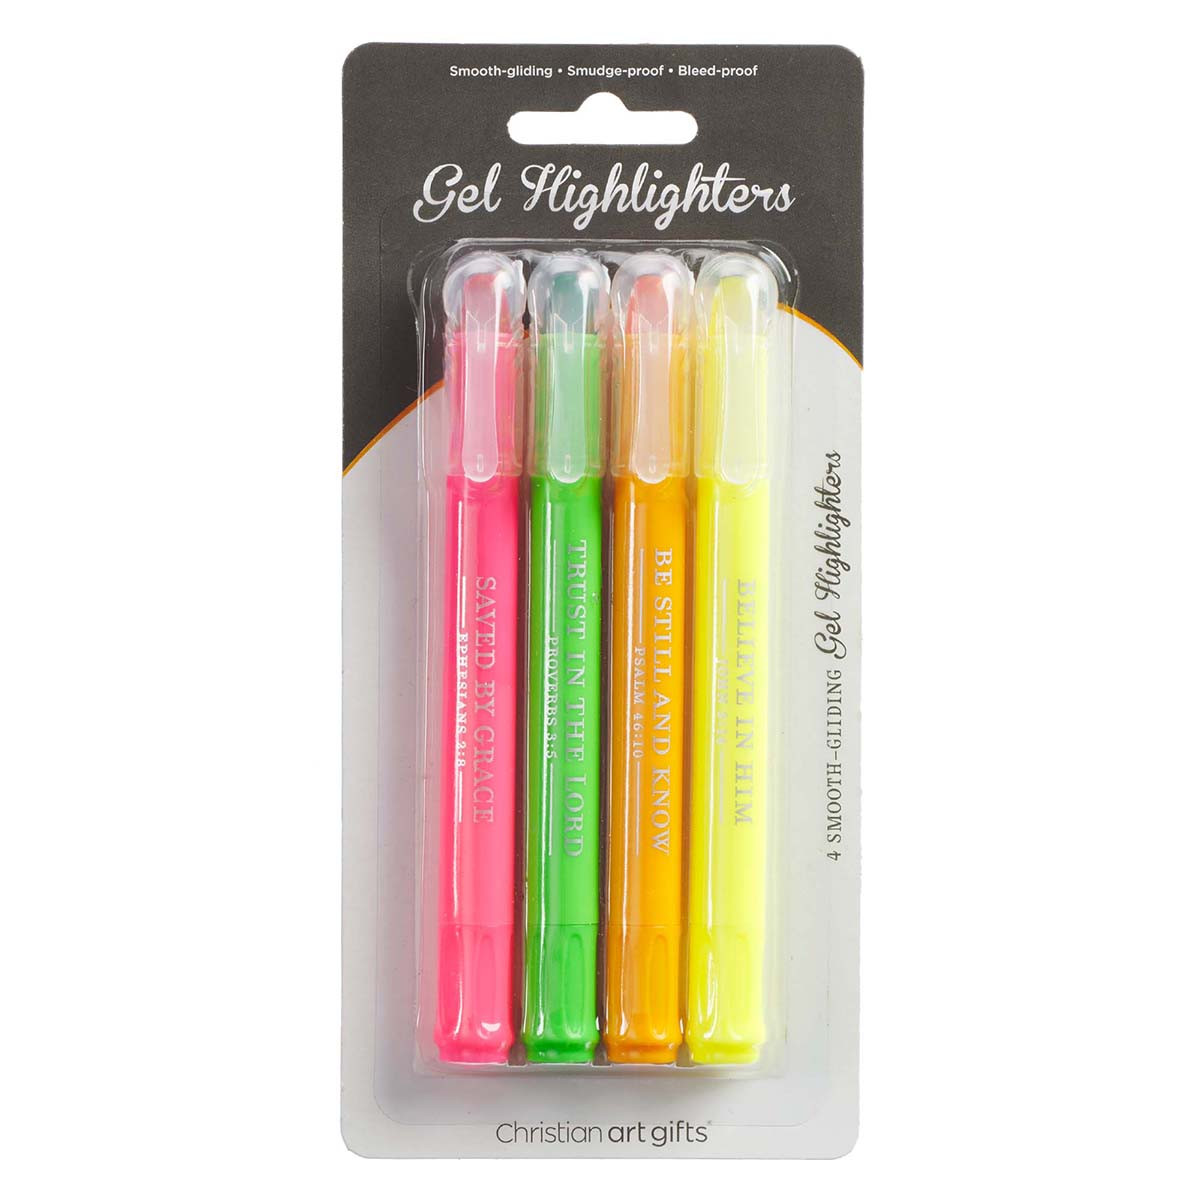 TWIST AND GLIDE HIGHLIGHTER SET OF 4